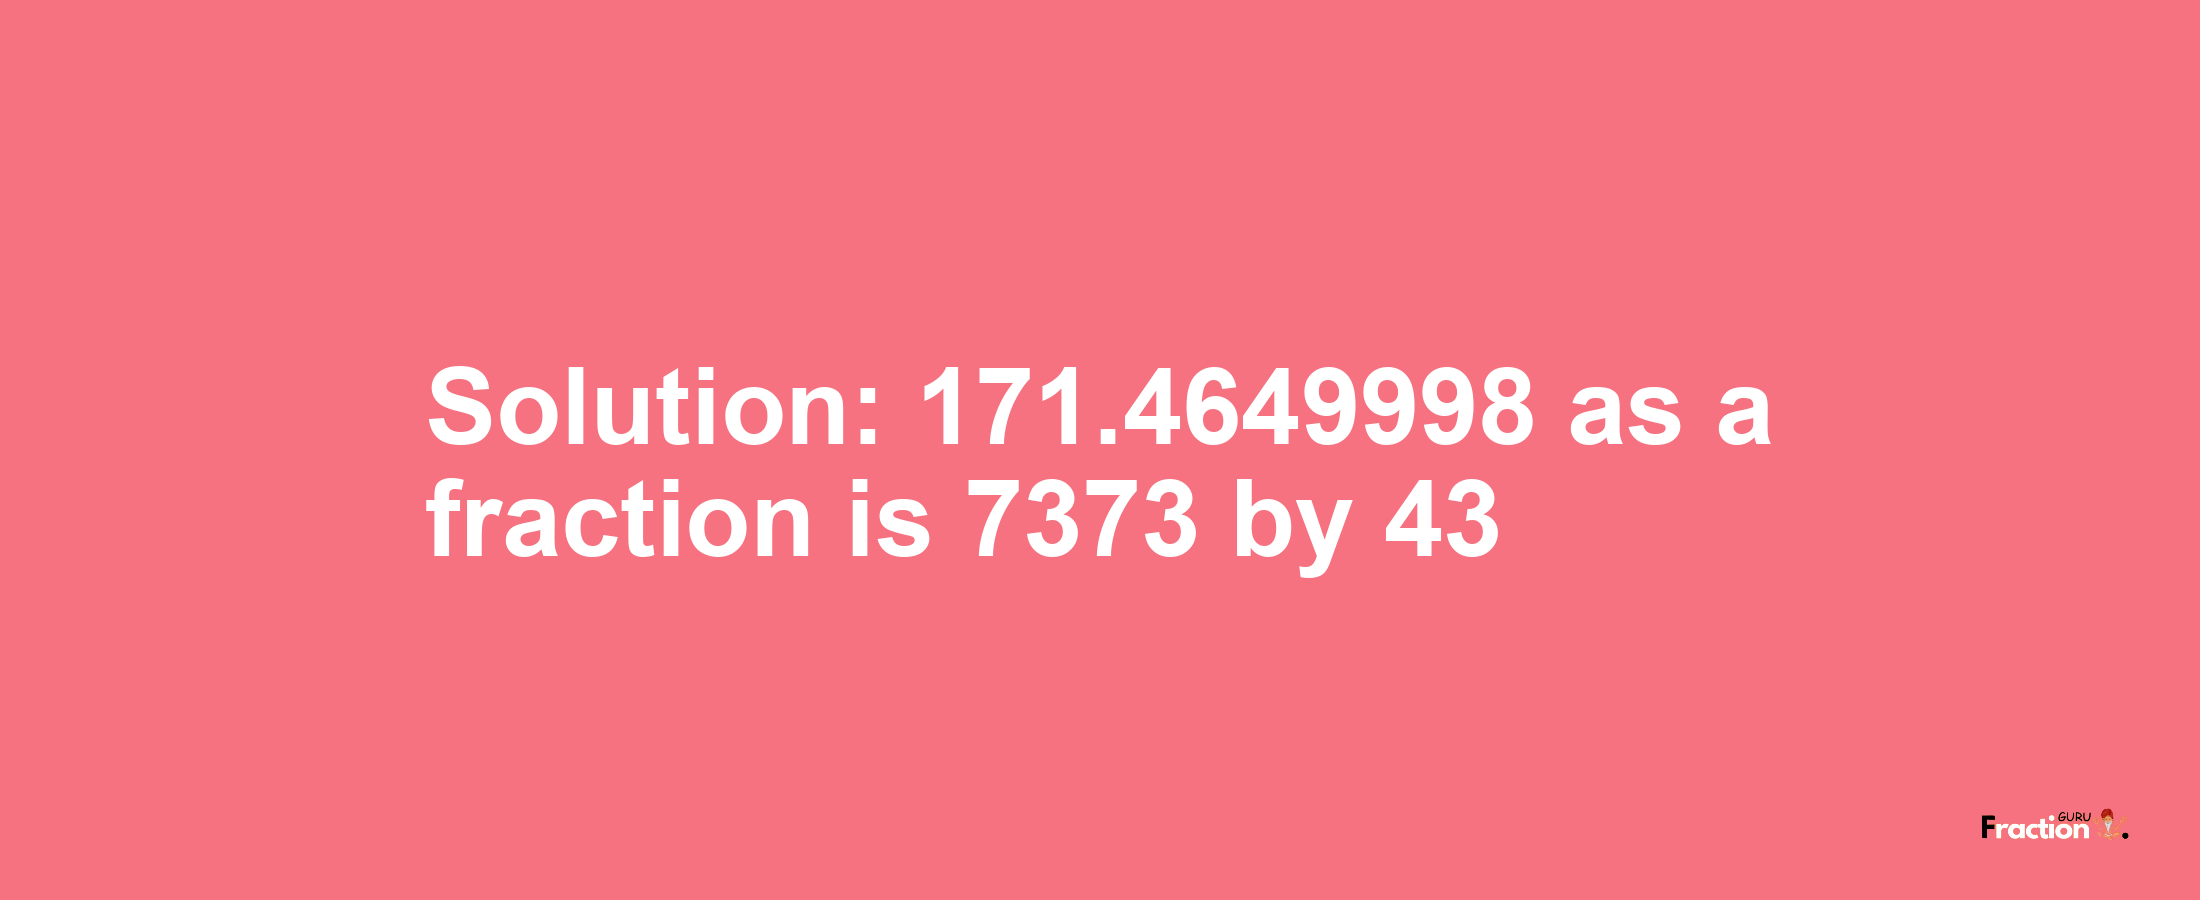 Solution:171.4649998 as a fraction is 7373/43